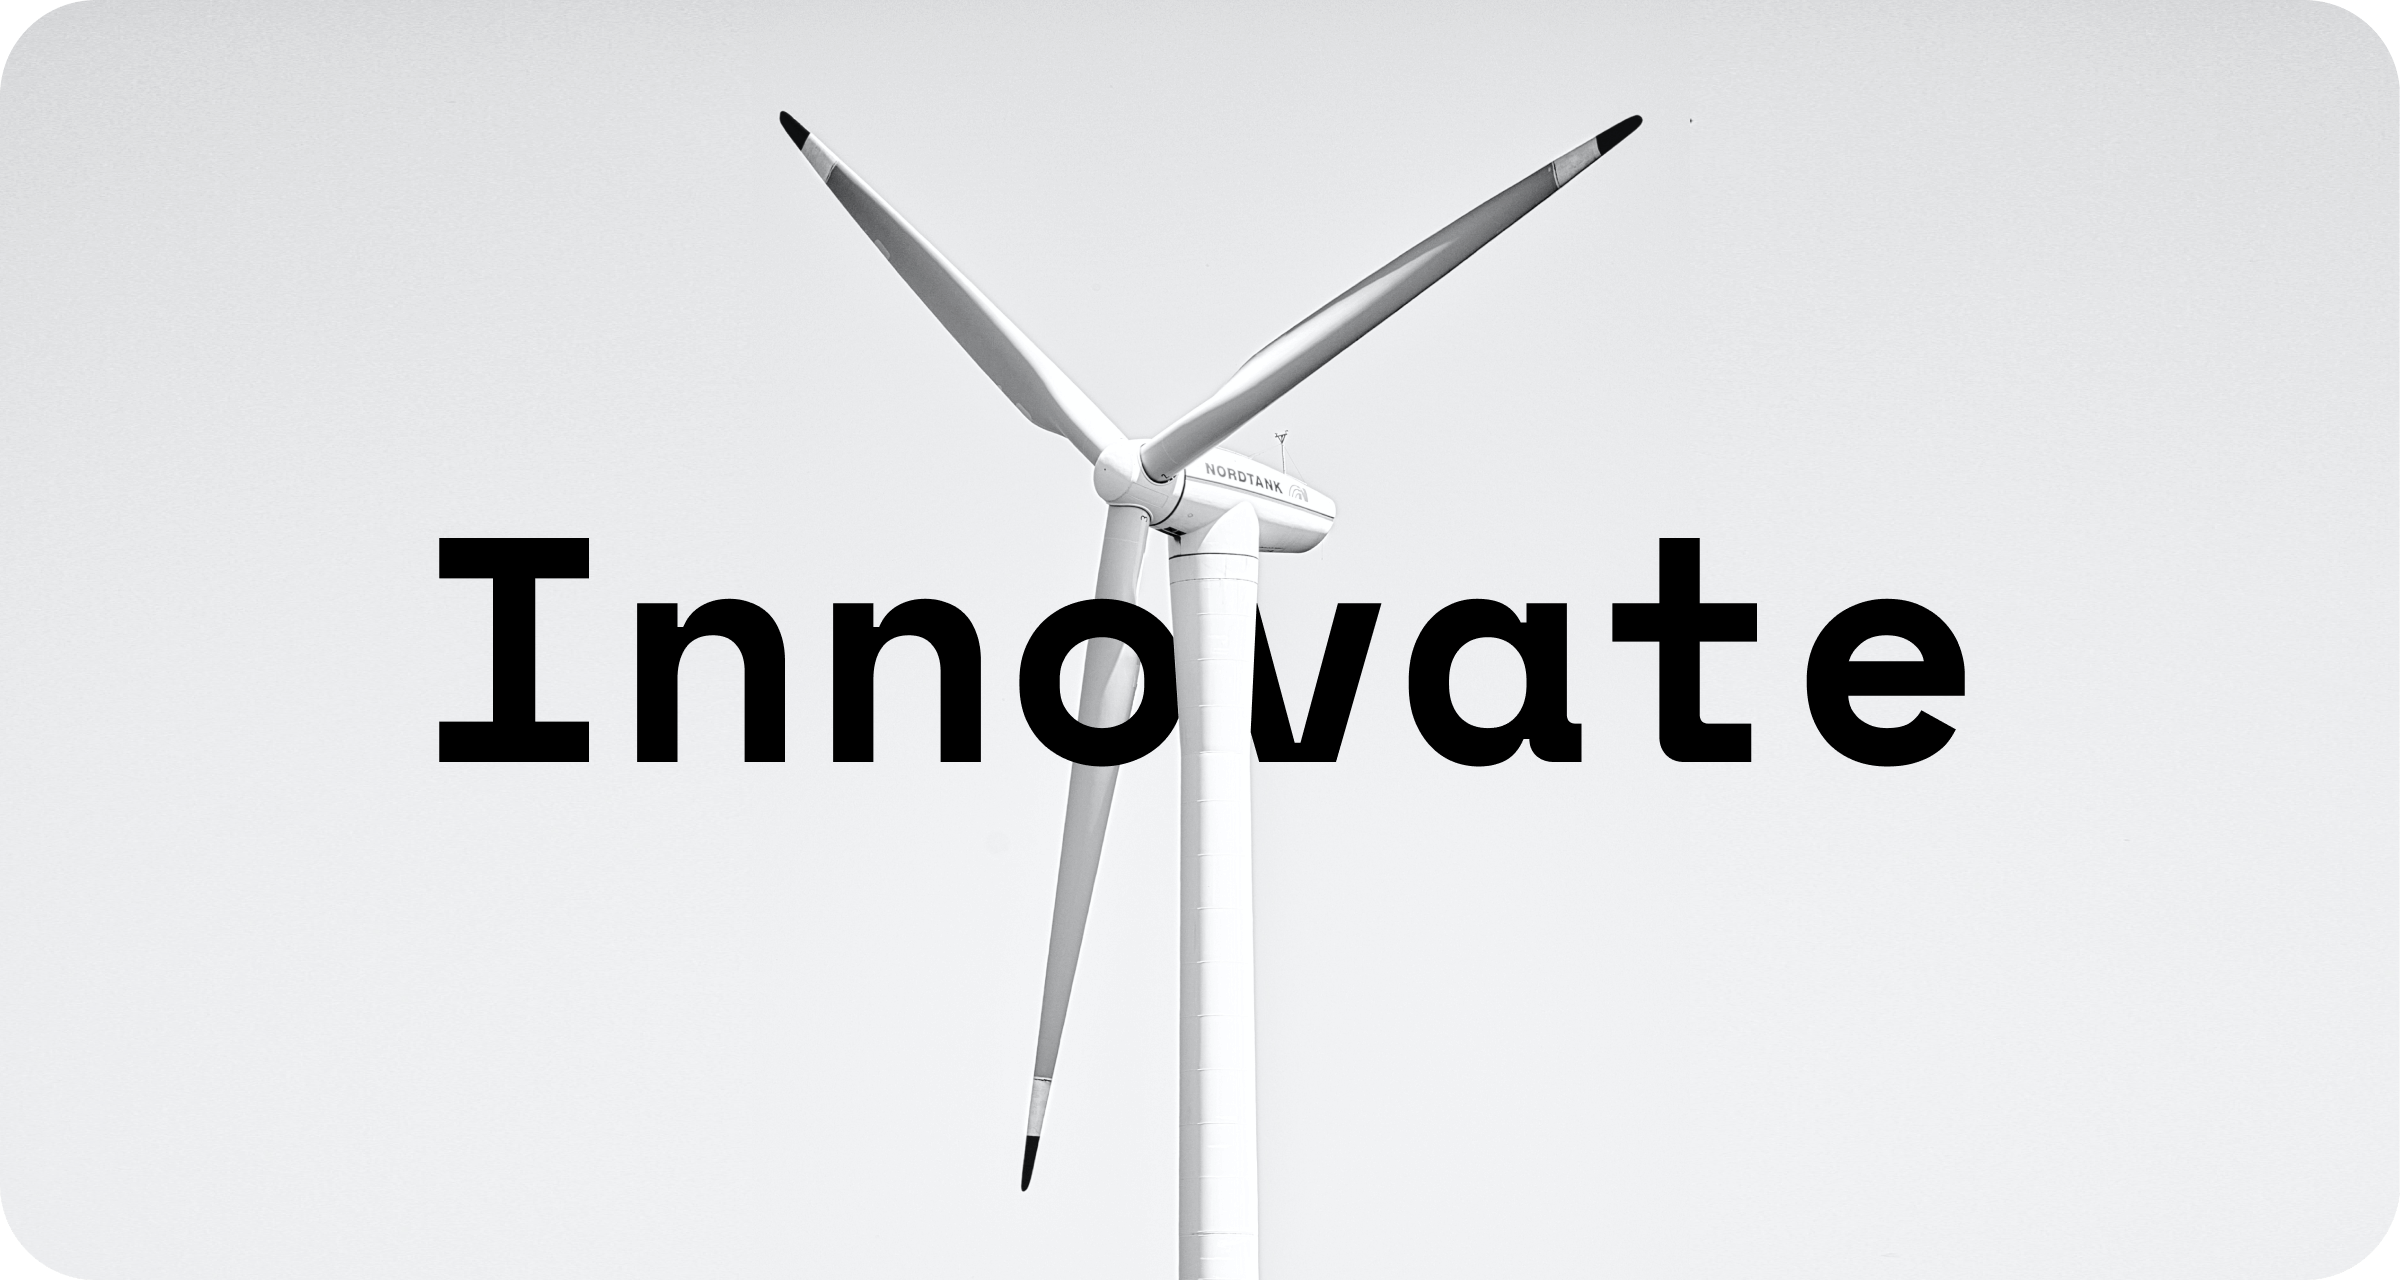 A wind turbine with the word 'innovate' over it